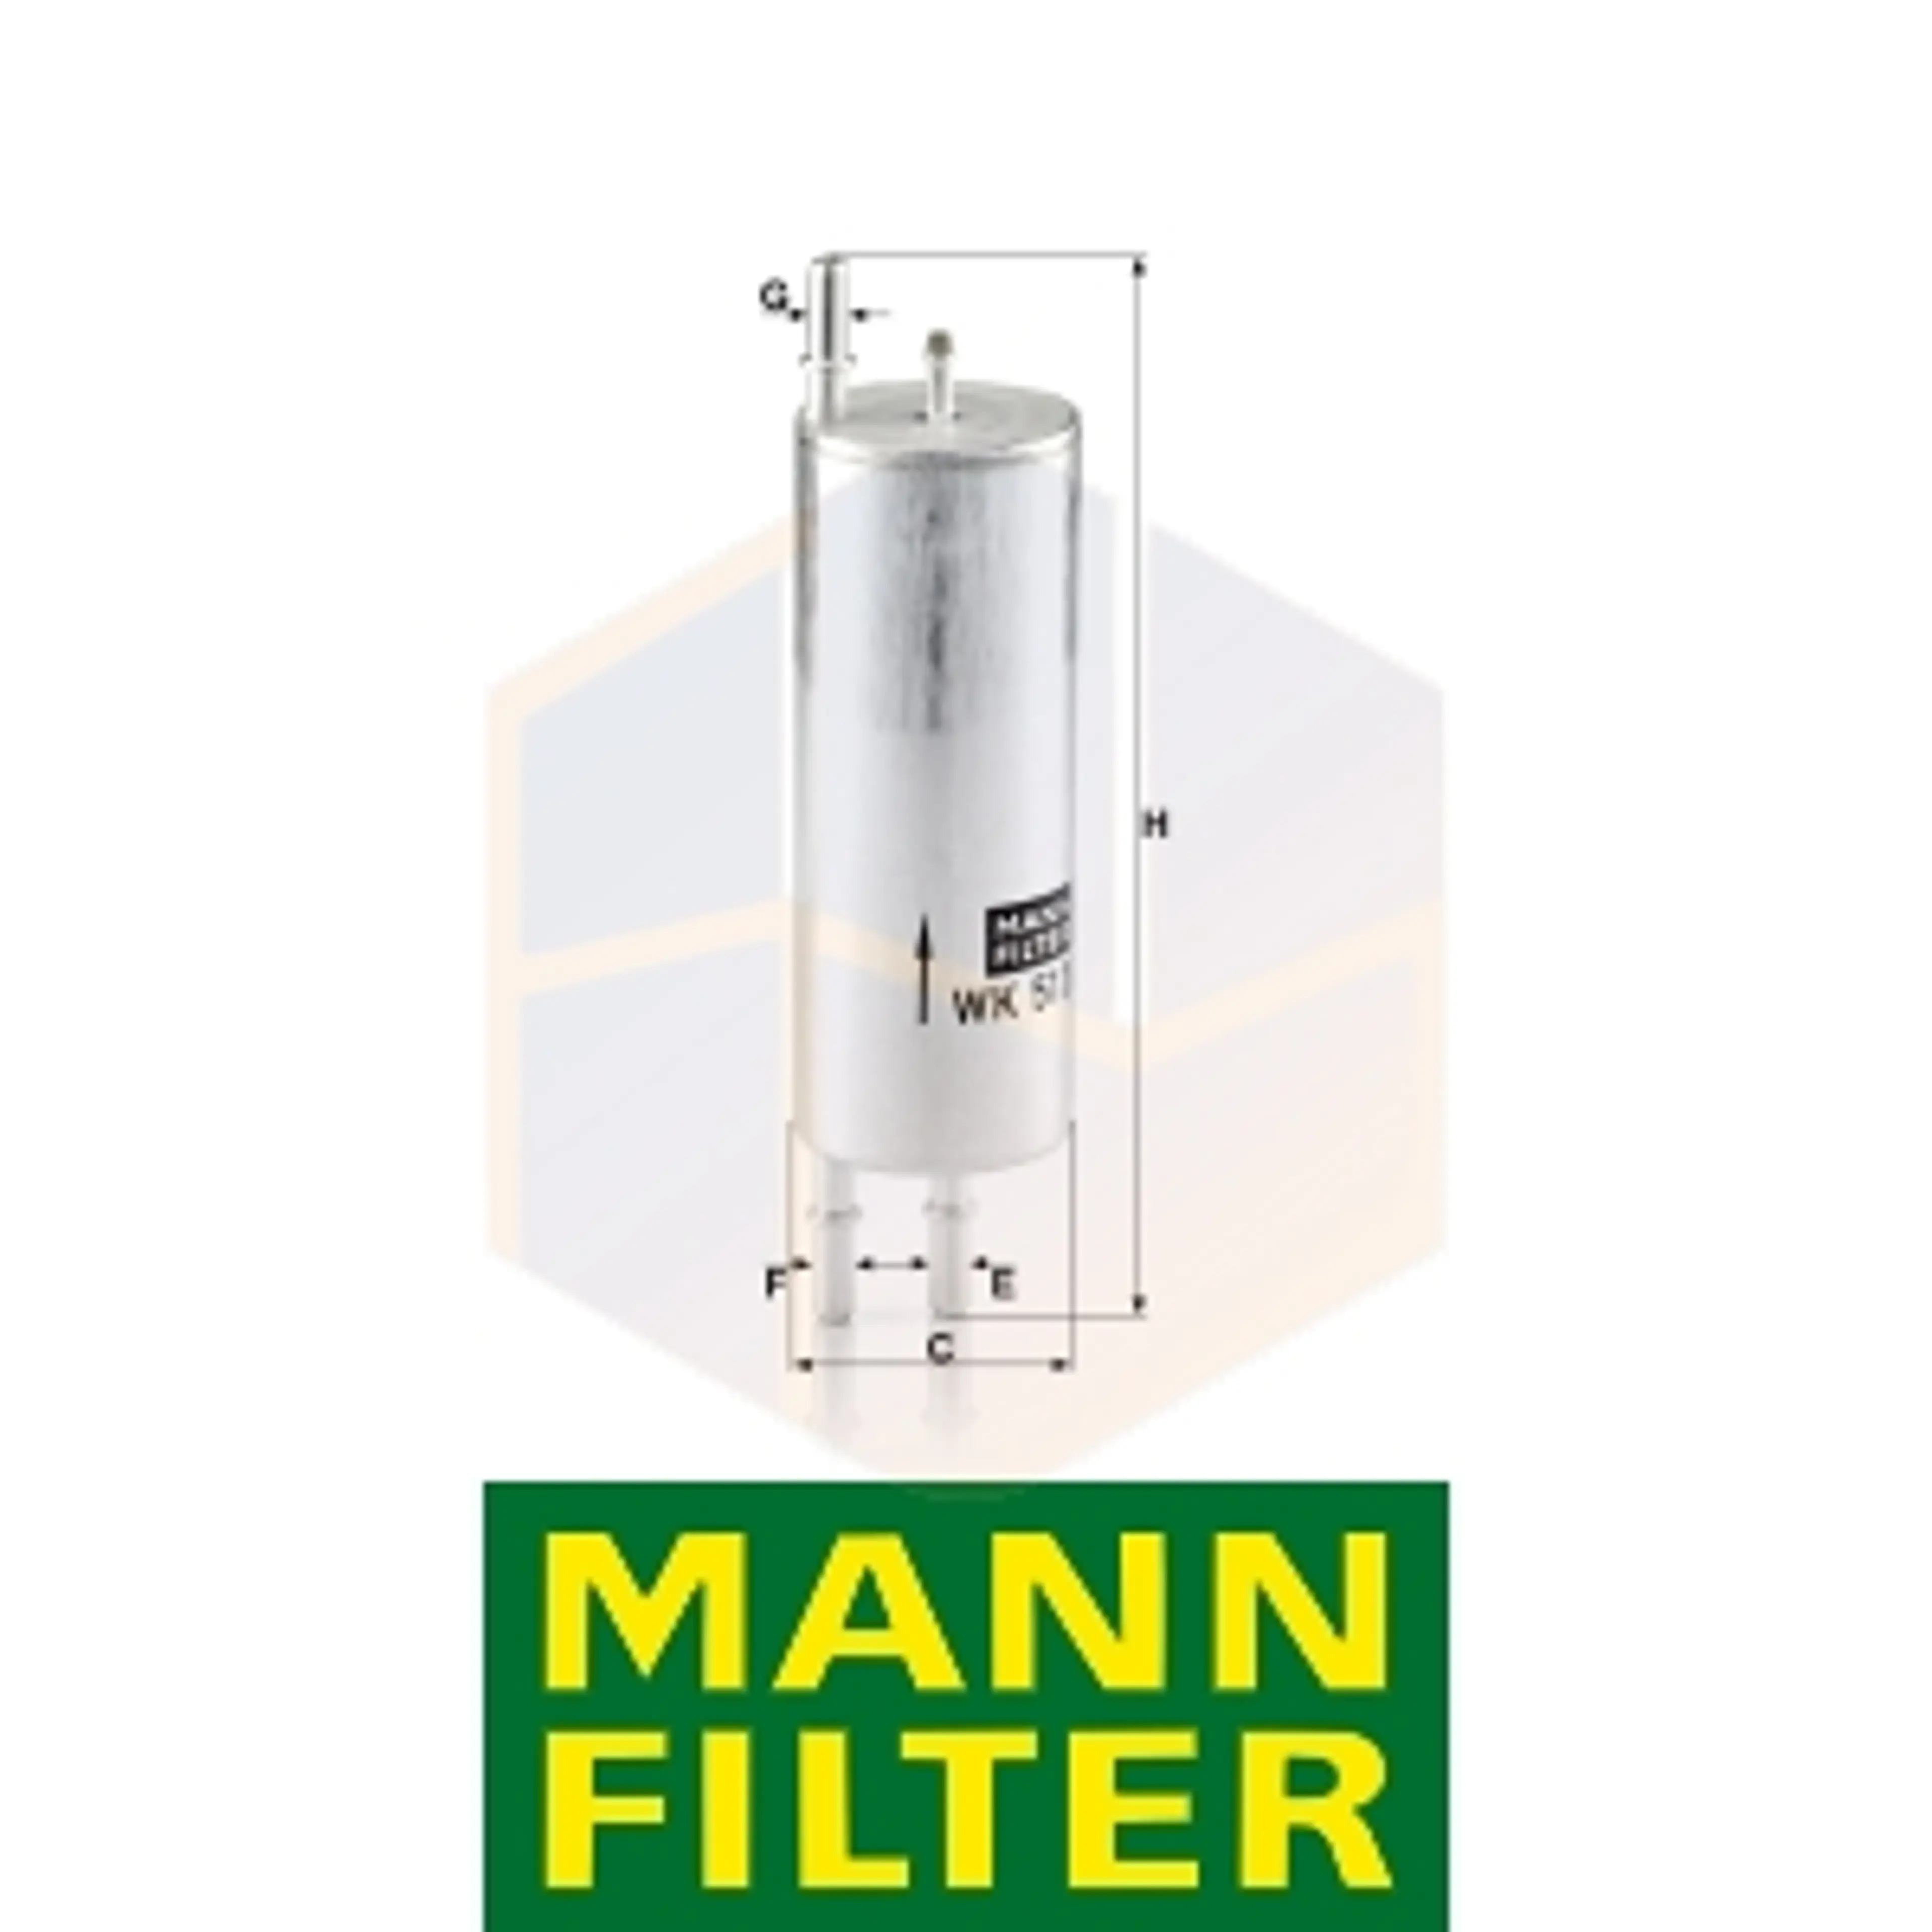 FILTRO COMBUSTIBLE WK 513/3 MANN